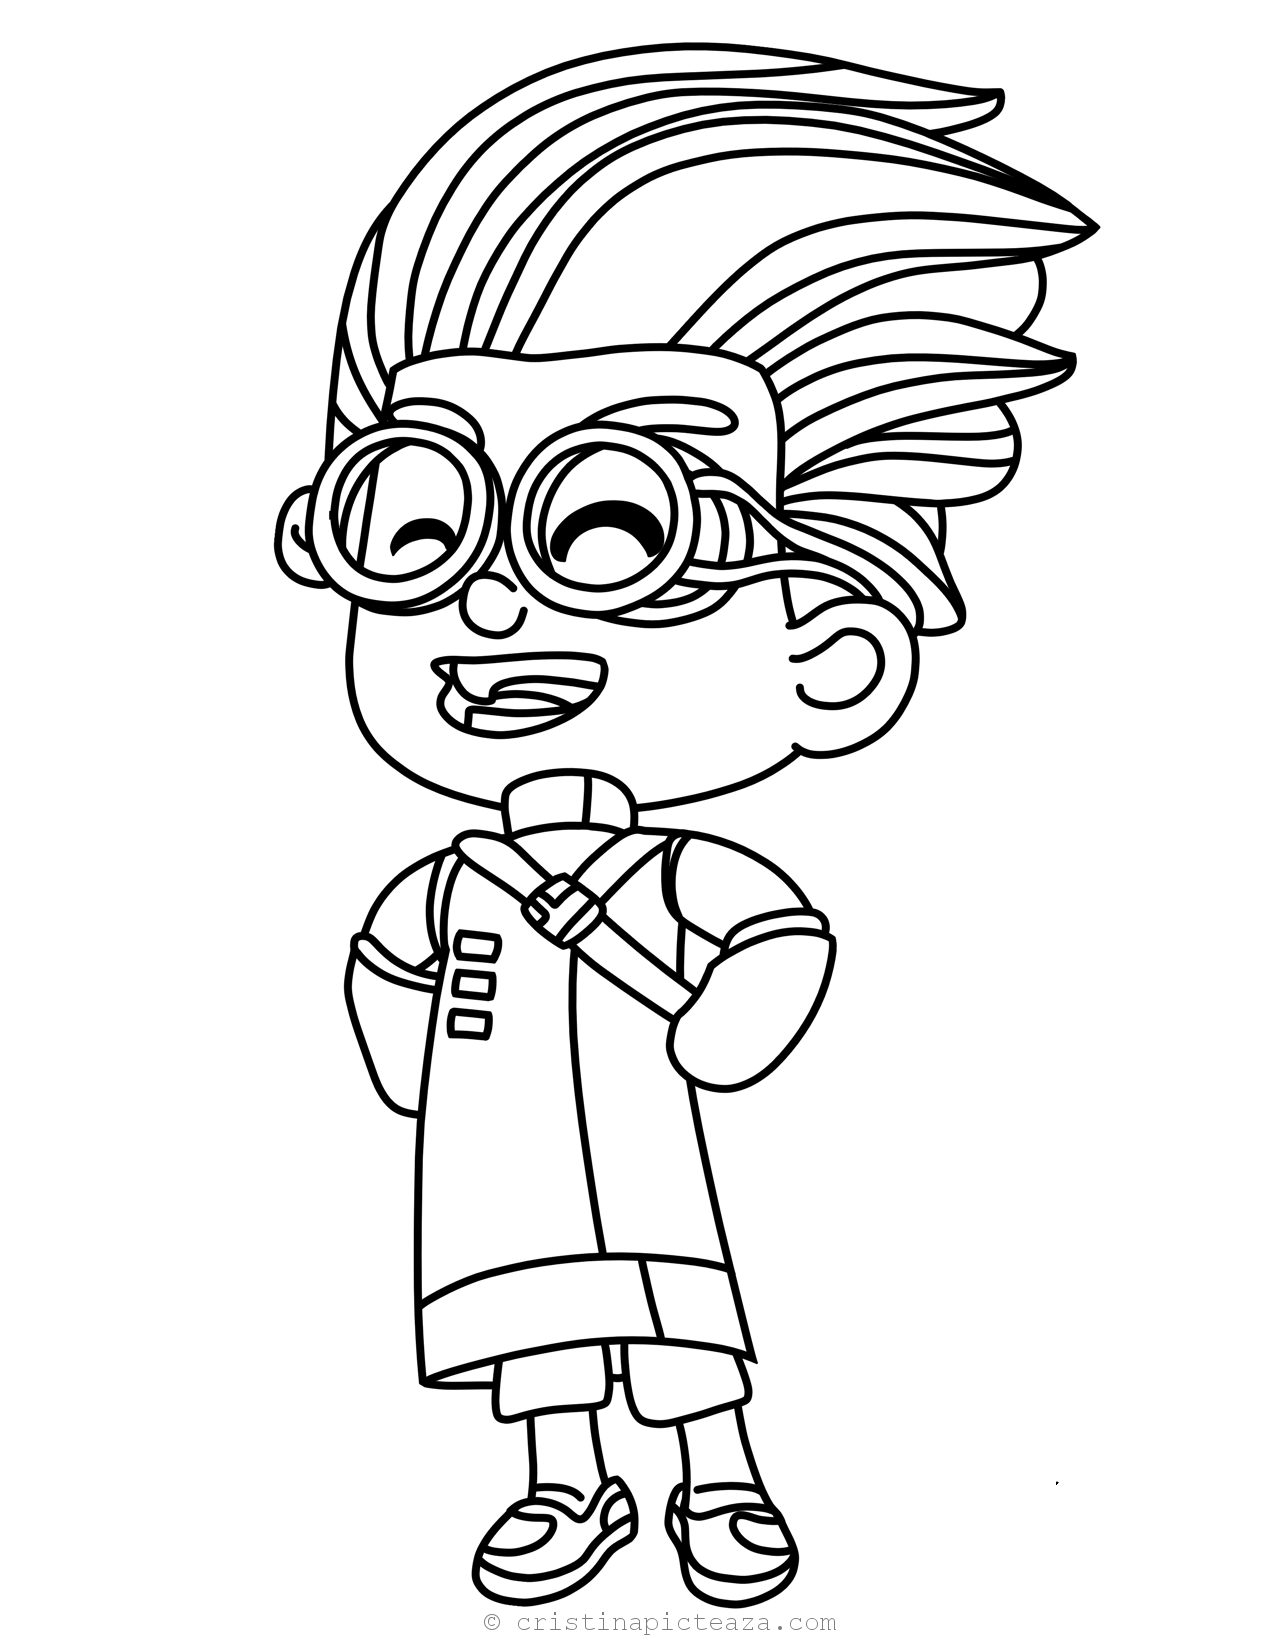 Mew Mew Grafting Splash PJ Masks coloring pages – Coloring sheets with your heroes